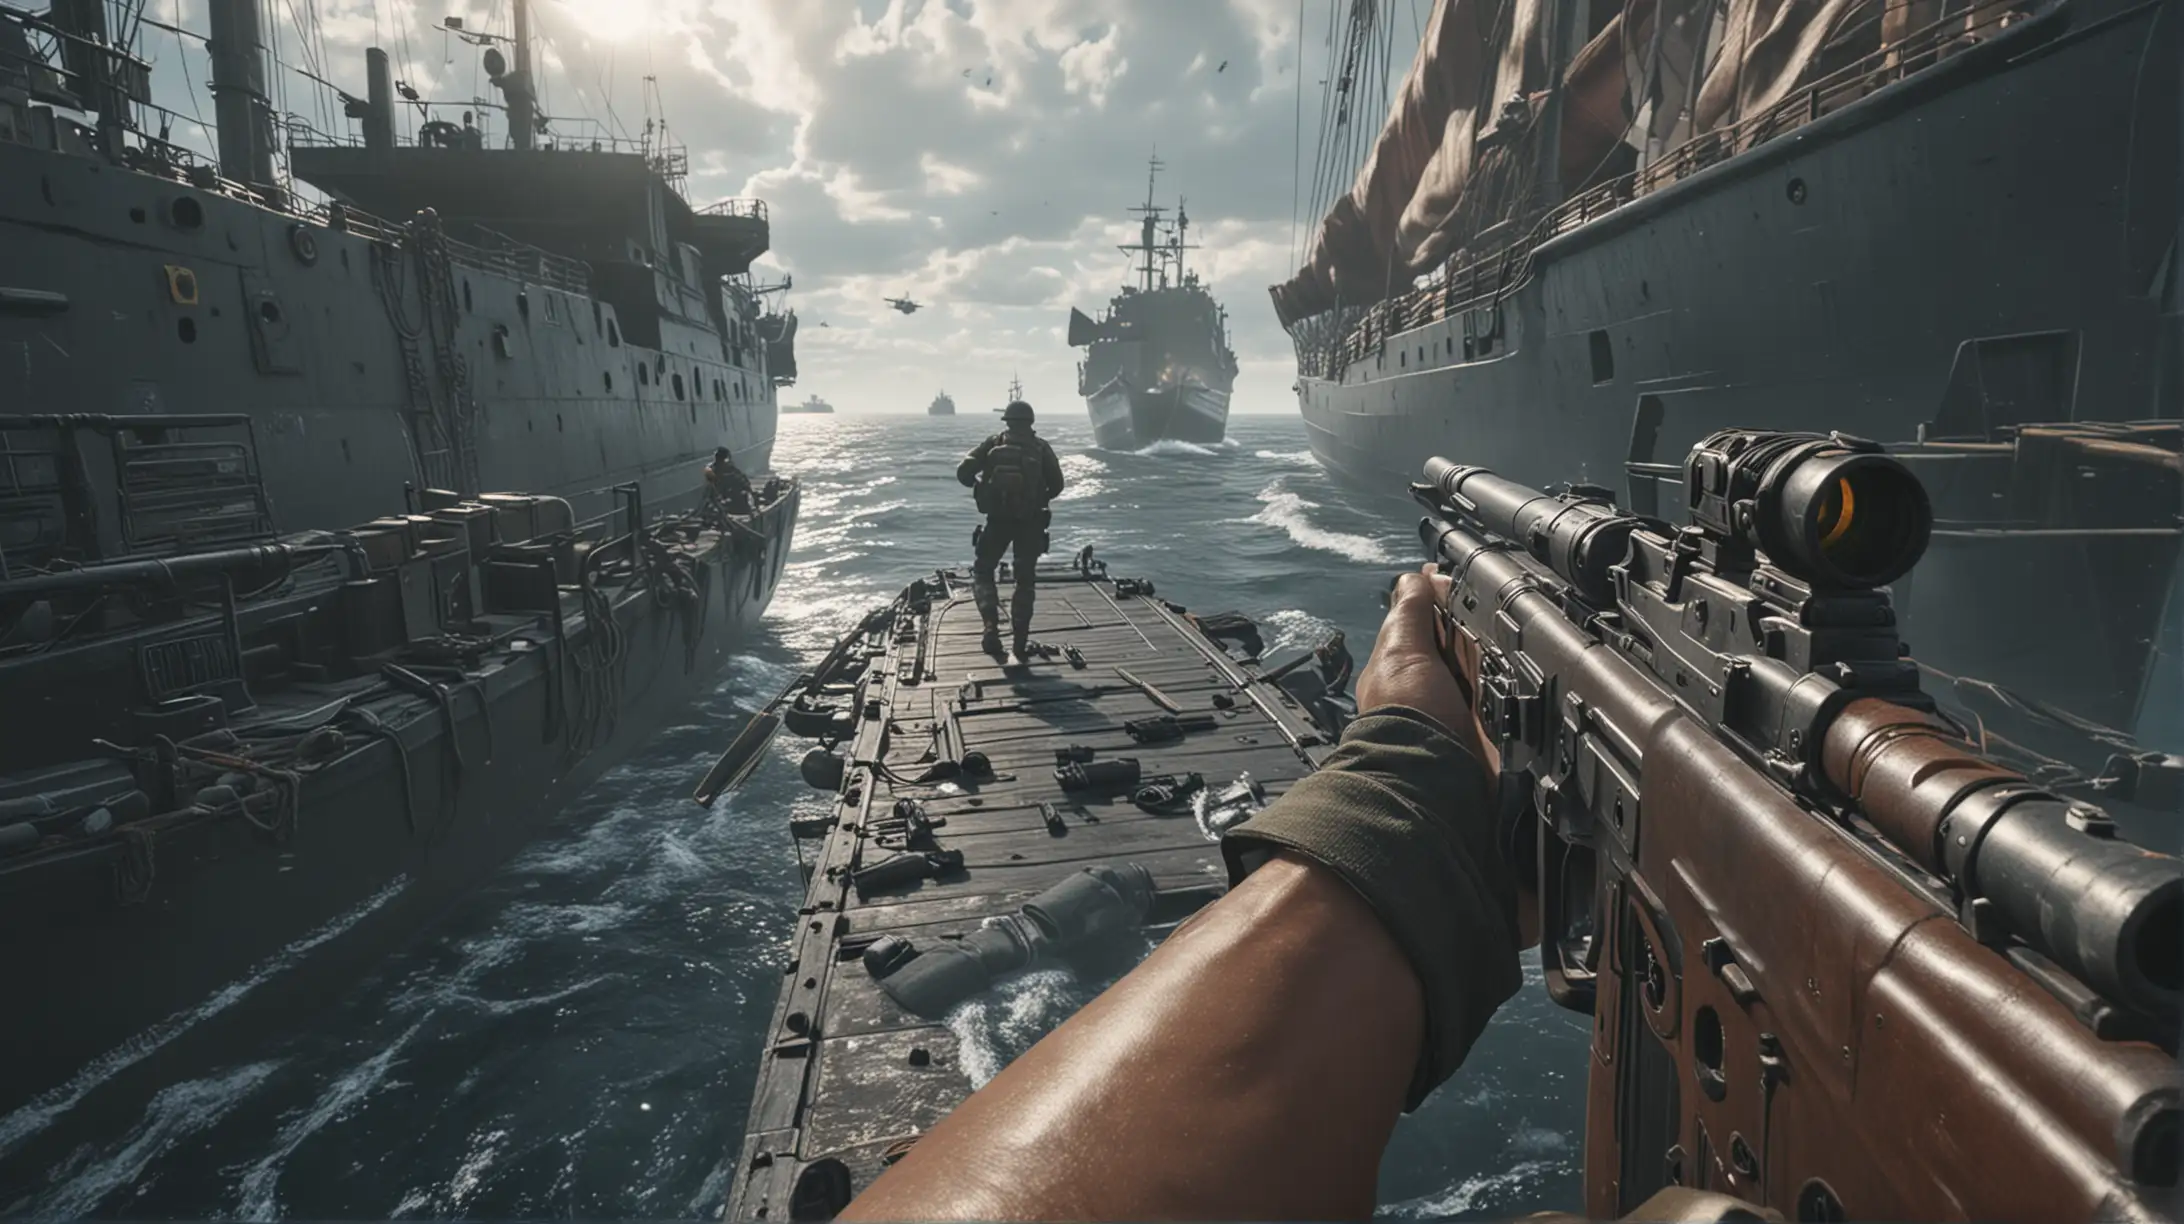 Generate a 4K hyperrealistic image of a soldier on a ship in a first person pov, with his gun in his hand shooting at enemies.